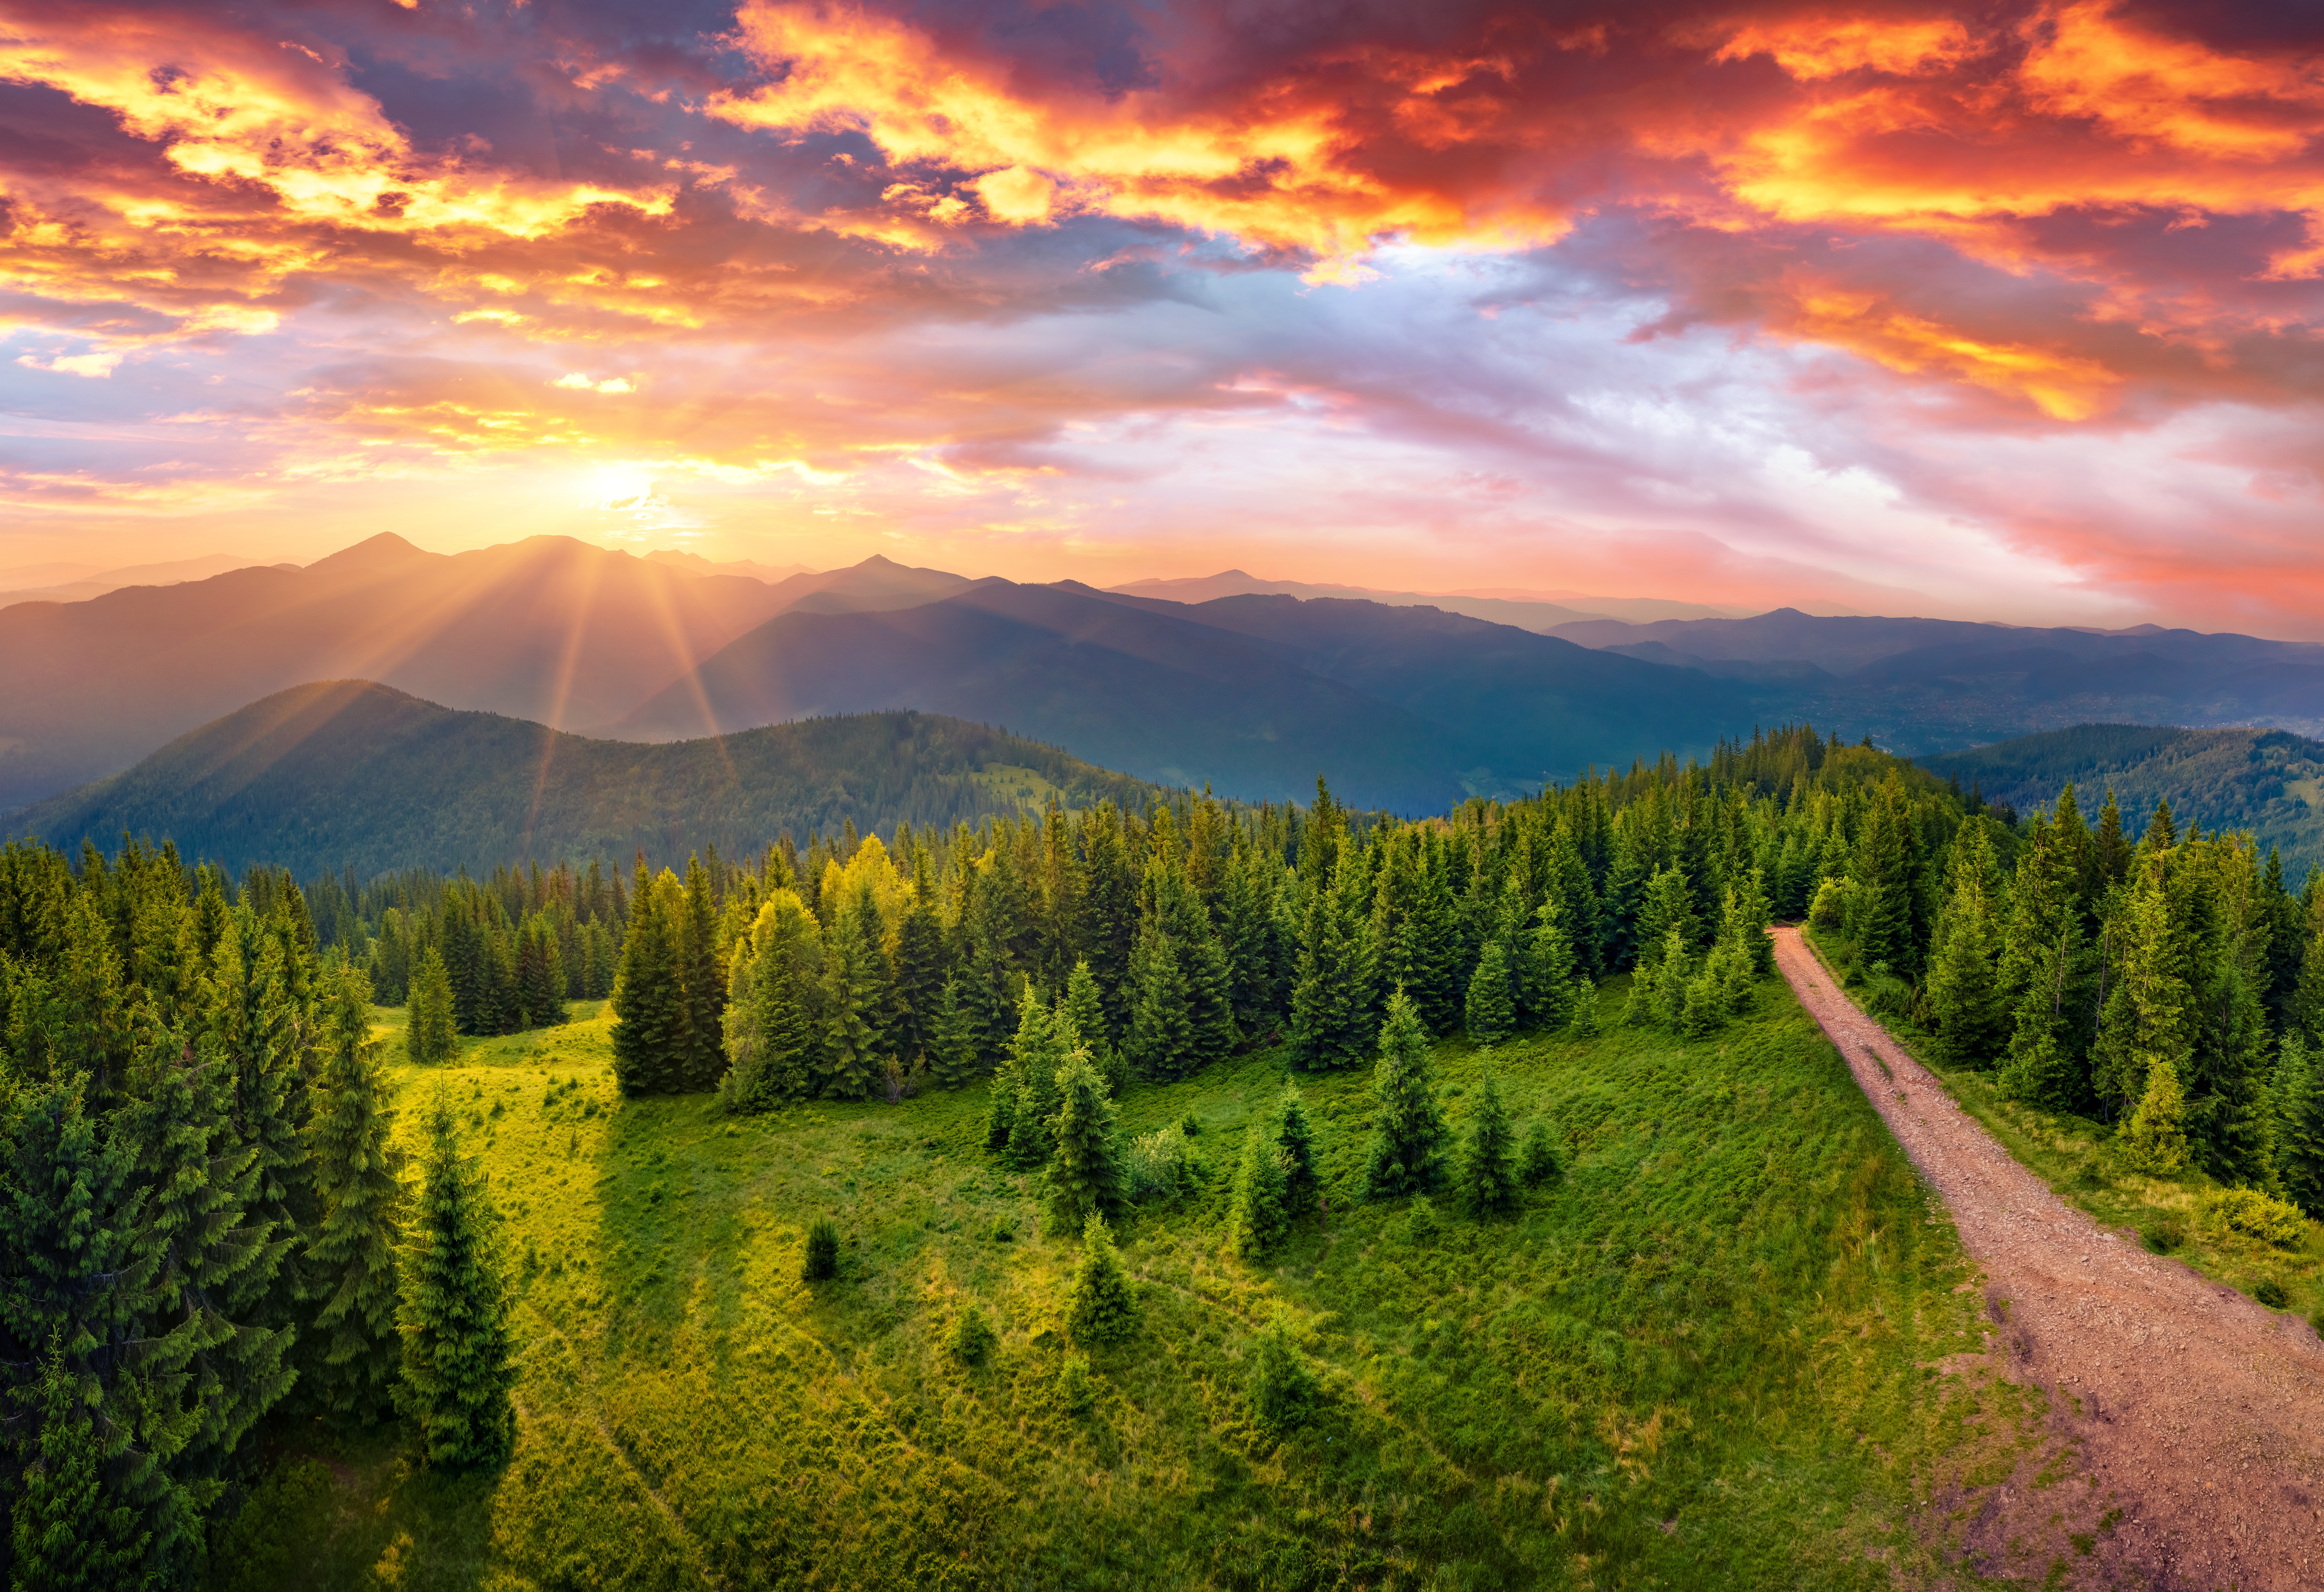 Landscape Mountains Nature Summer Sun Sunset Valley Trees Road Forest Clouds Hills Sky Green 8500x5823